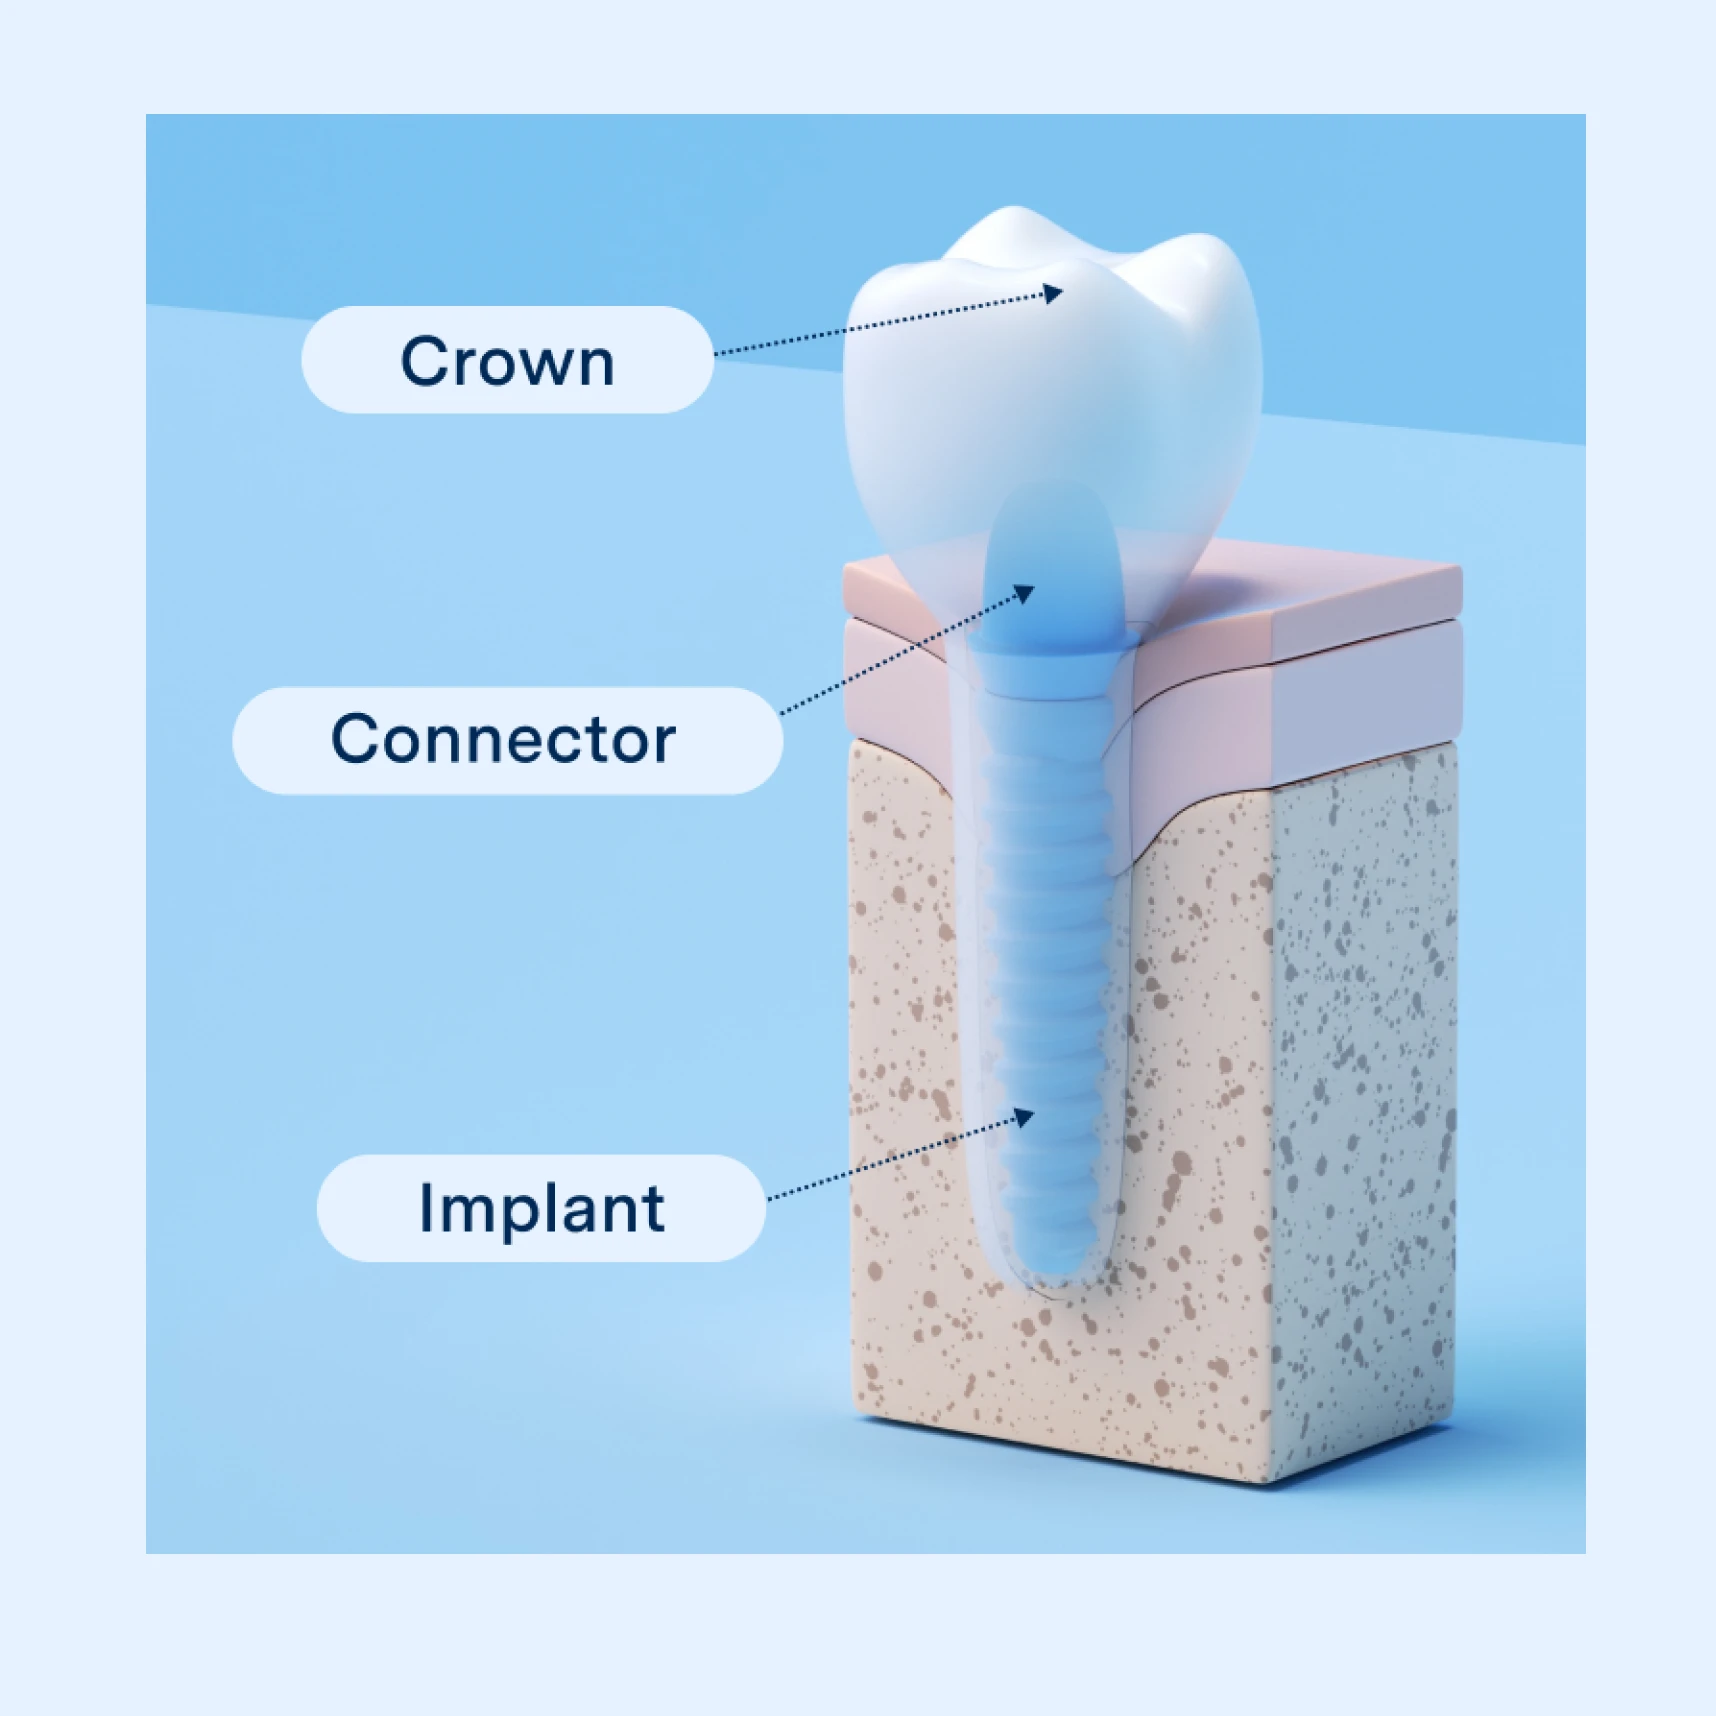 3D diagram of dental implant parts with labels Crown, Connector, Implant on a jaw cross-section against blue.